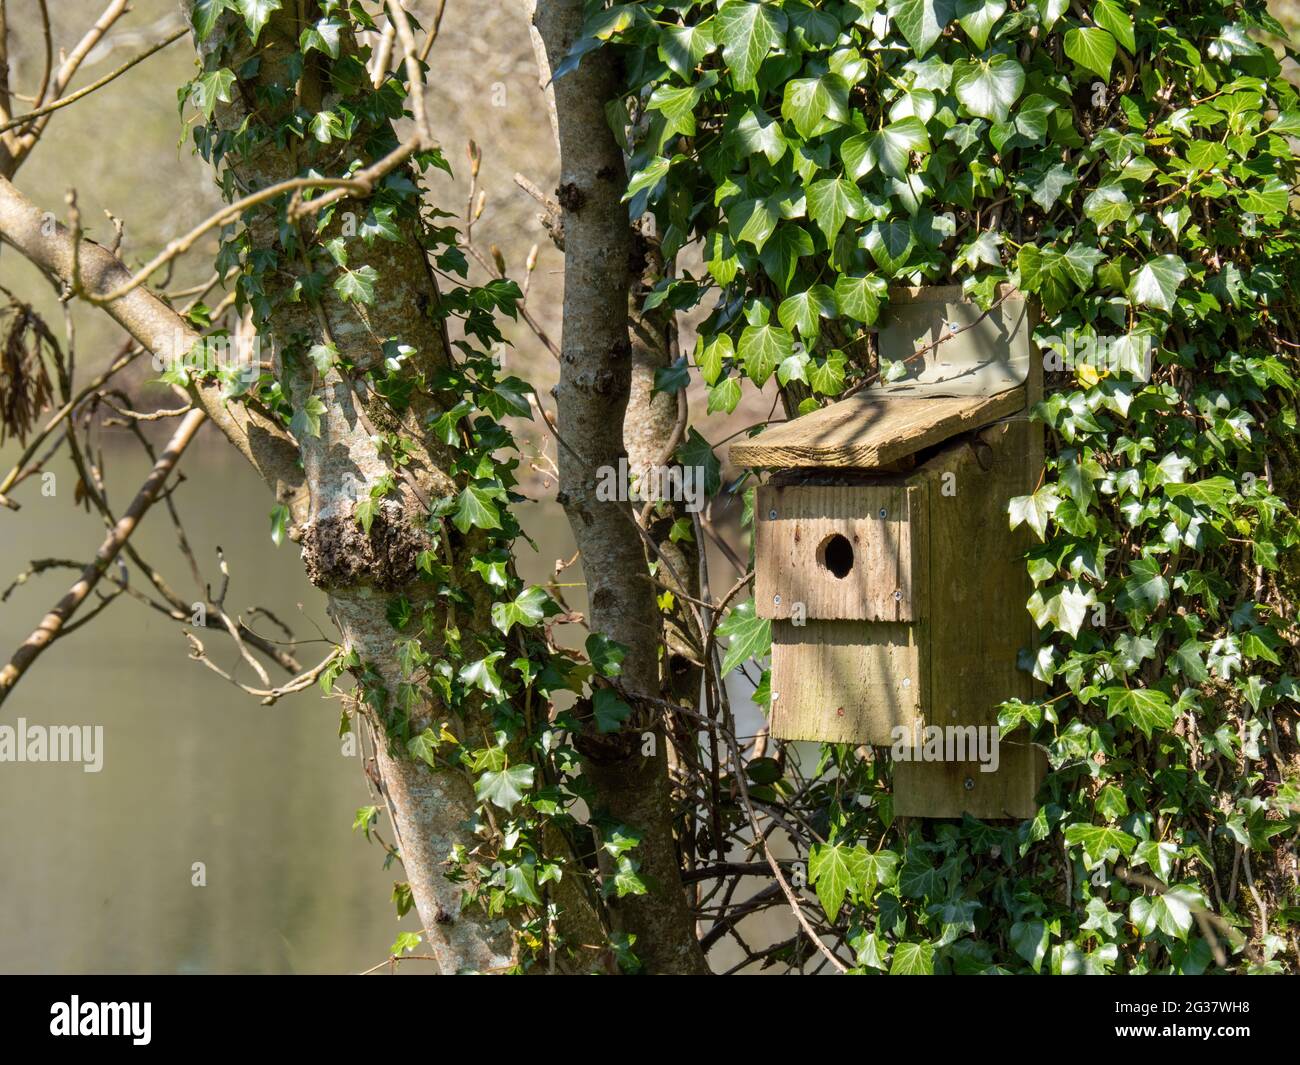 Nesting box for birds hidden in ivy and garden greenery, trees, plants. Stock Photo